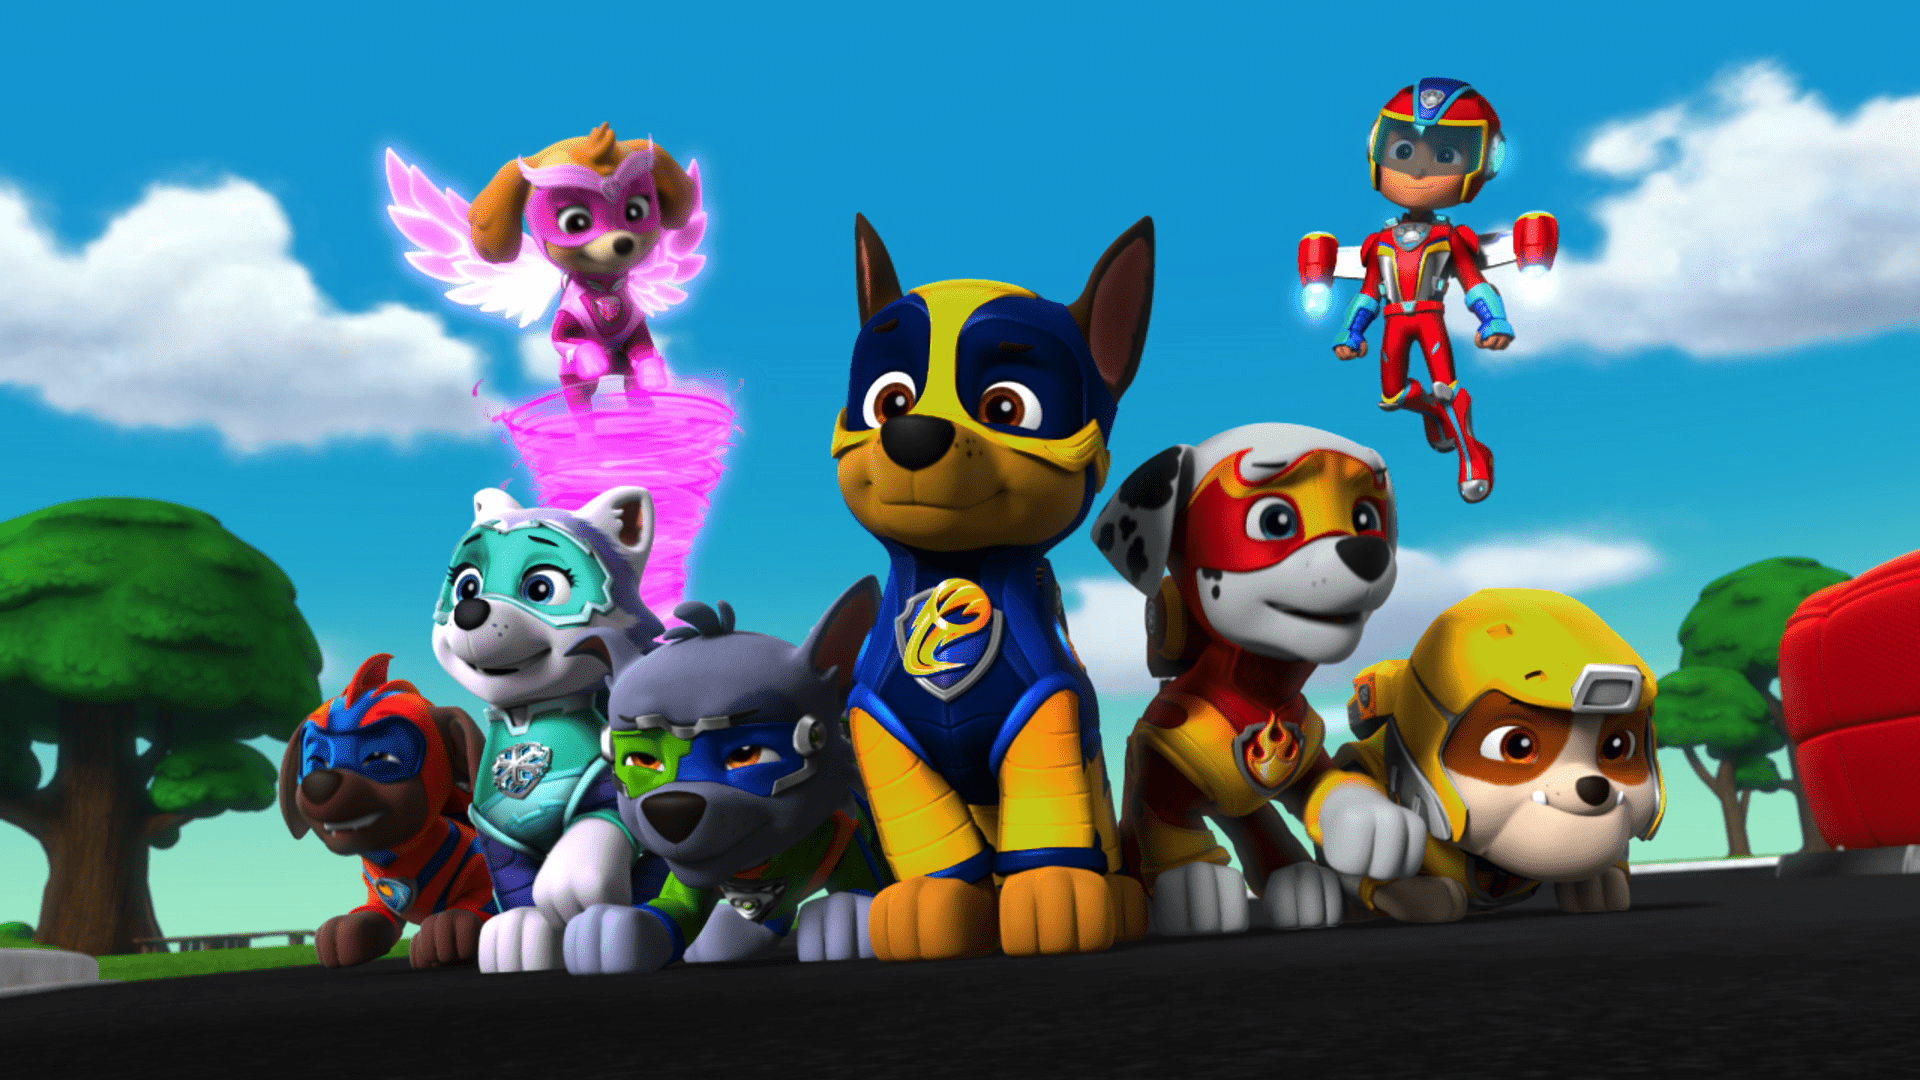 Paw Patrol Mighty Pups Wallpapers - Top Free Paw Patrol Mighty Pups ...